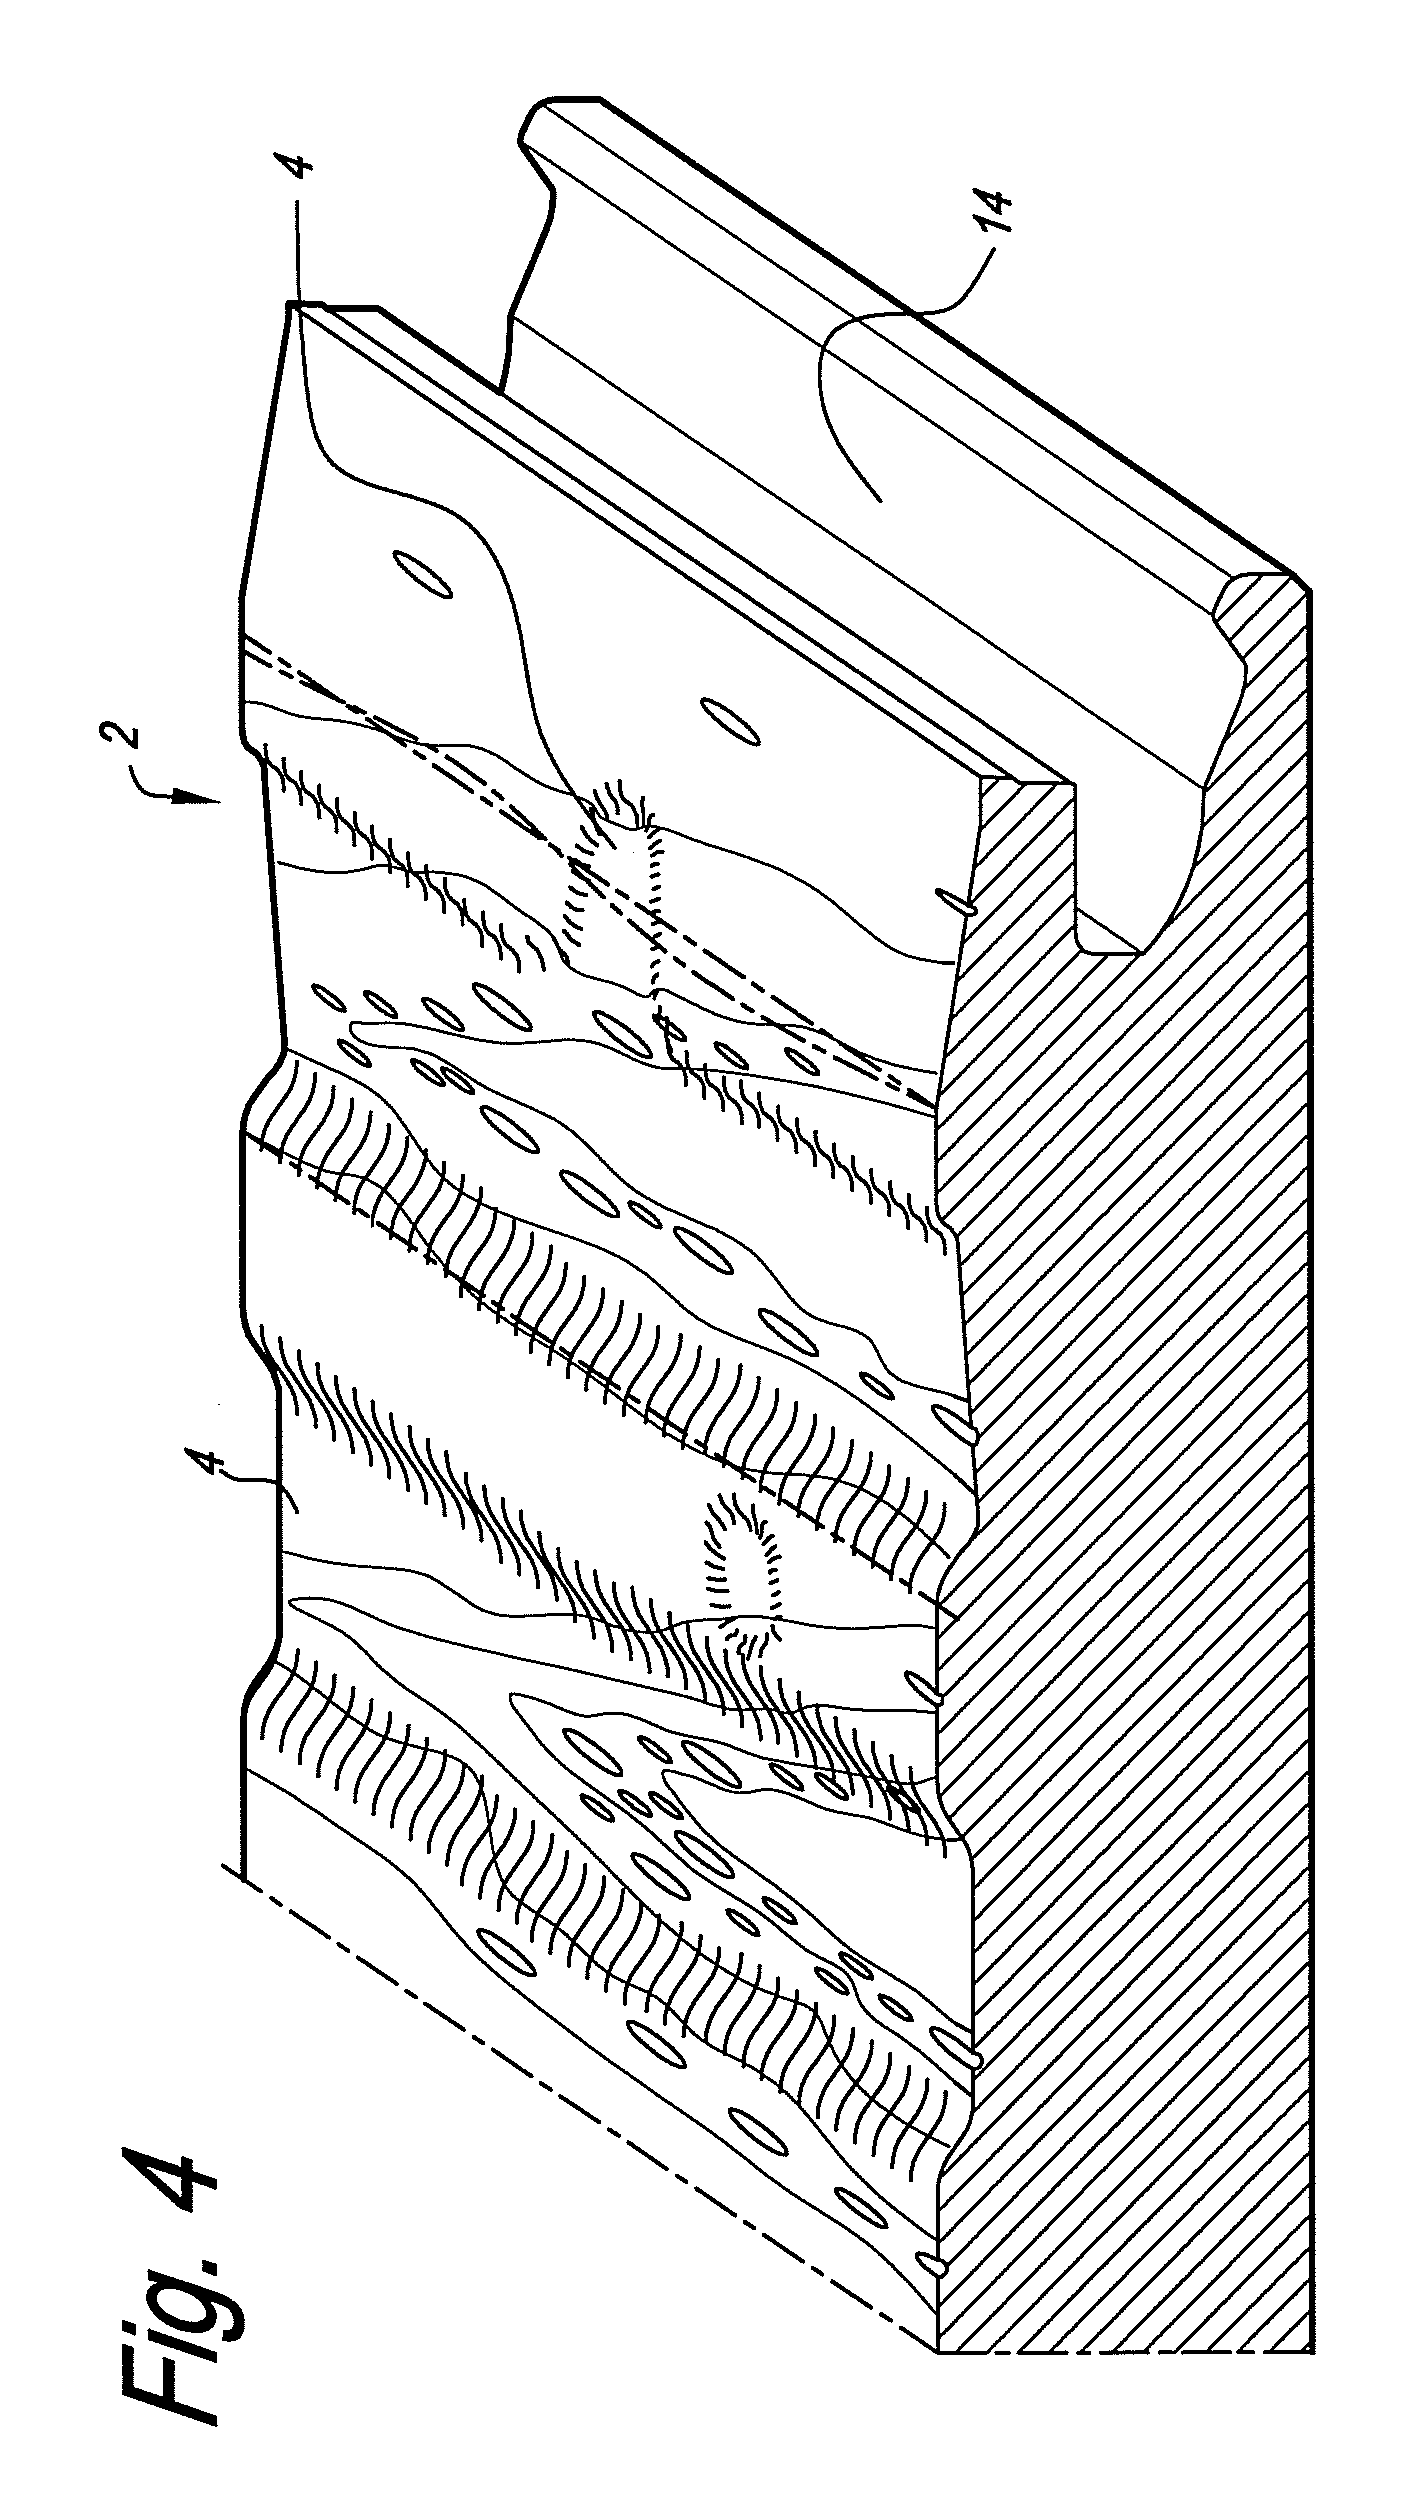 Automated floor board texturing cell and method